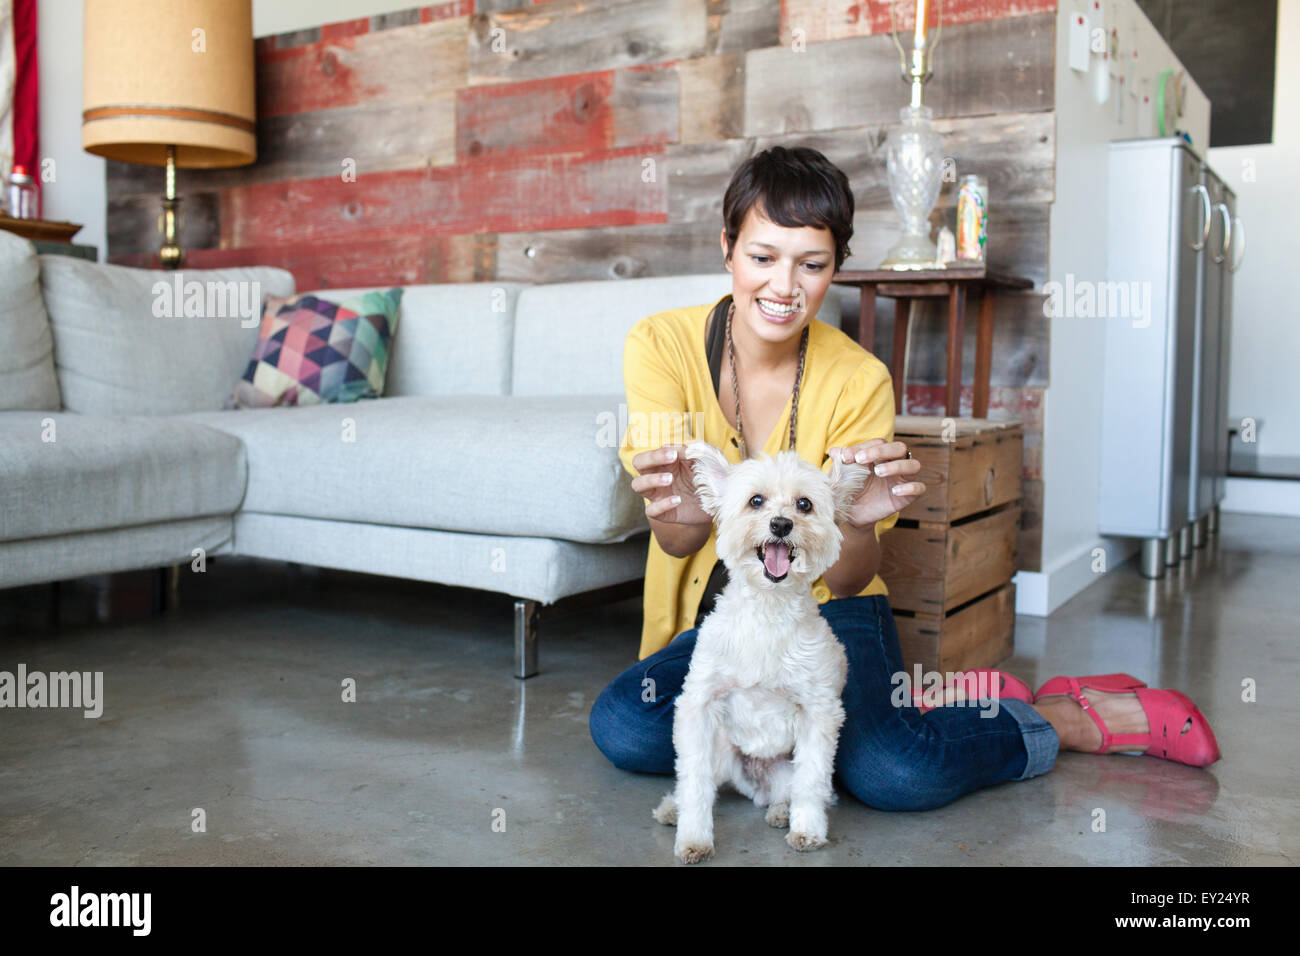 Young woman holding up dogs ears in living room Stock Photo